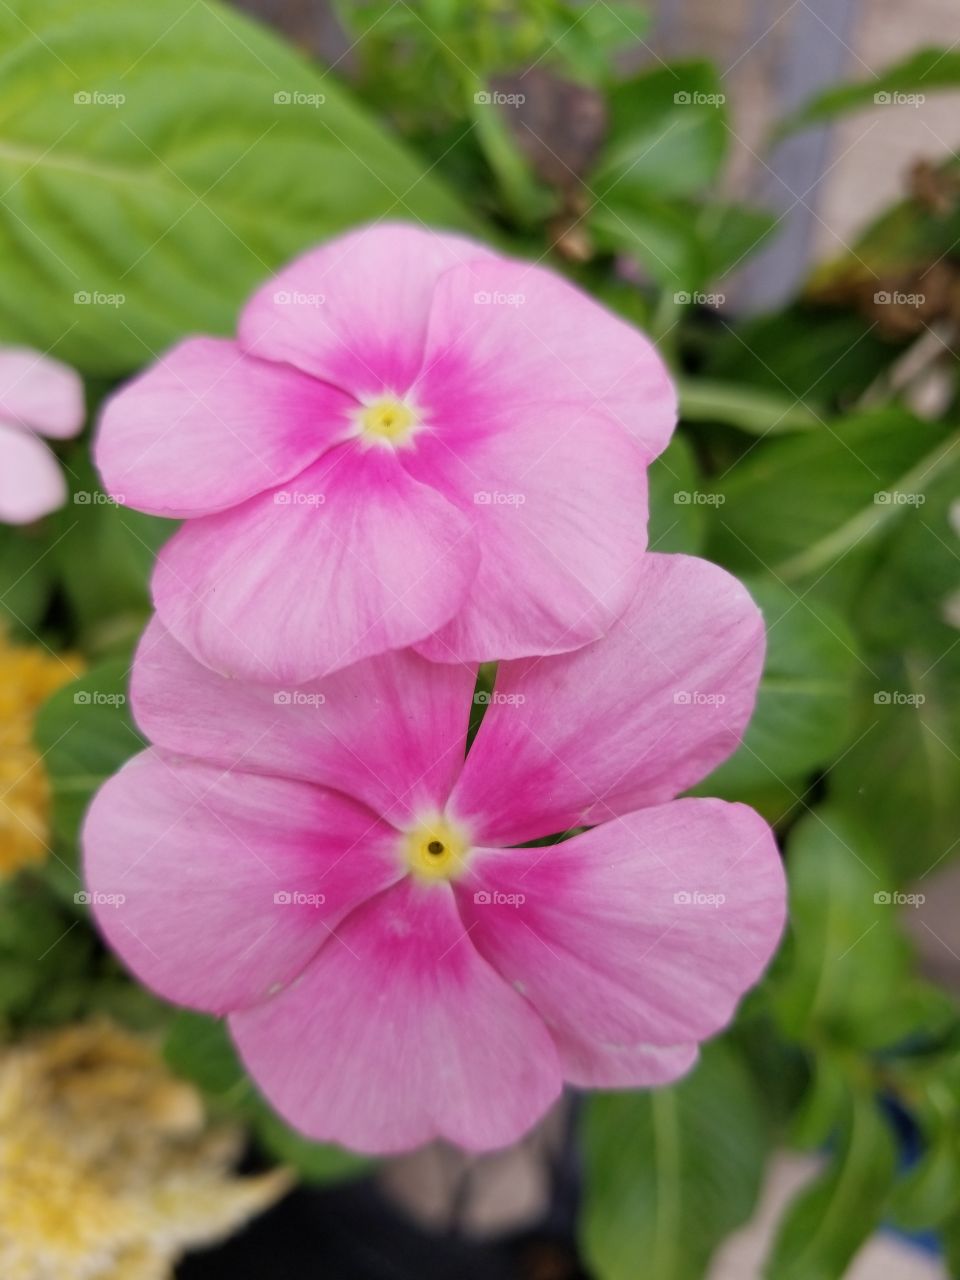 I sit atop the green leaves with a bright yellow and white center and a lavish dark pink circle with light pink protruding petals blooming in the summer sun.